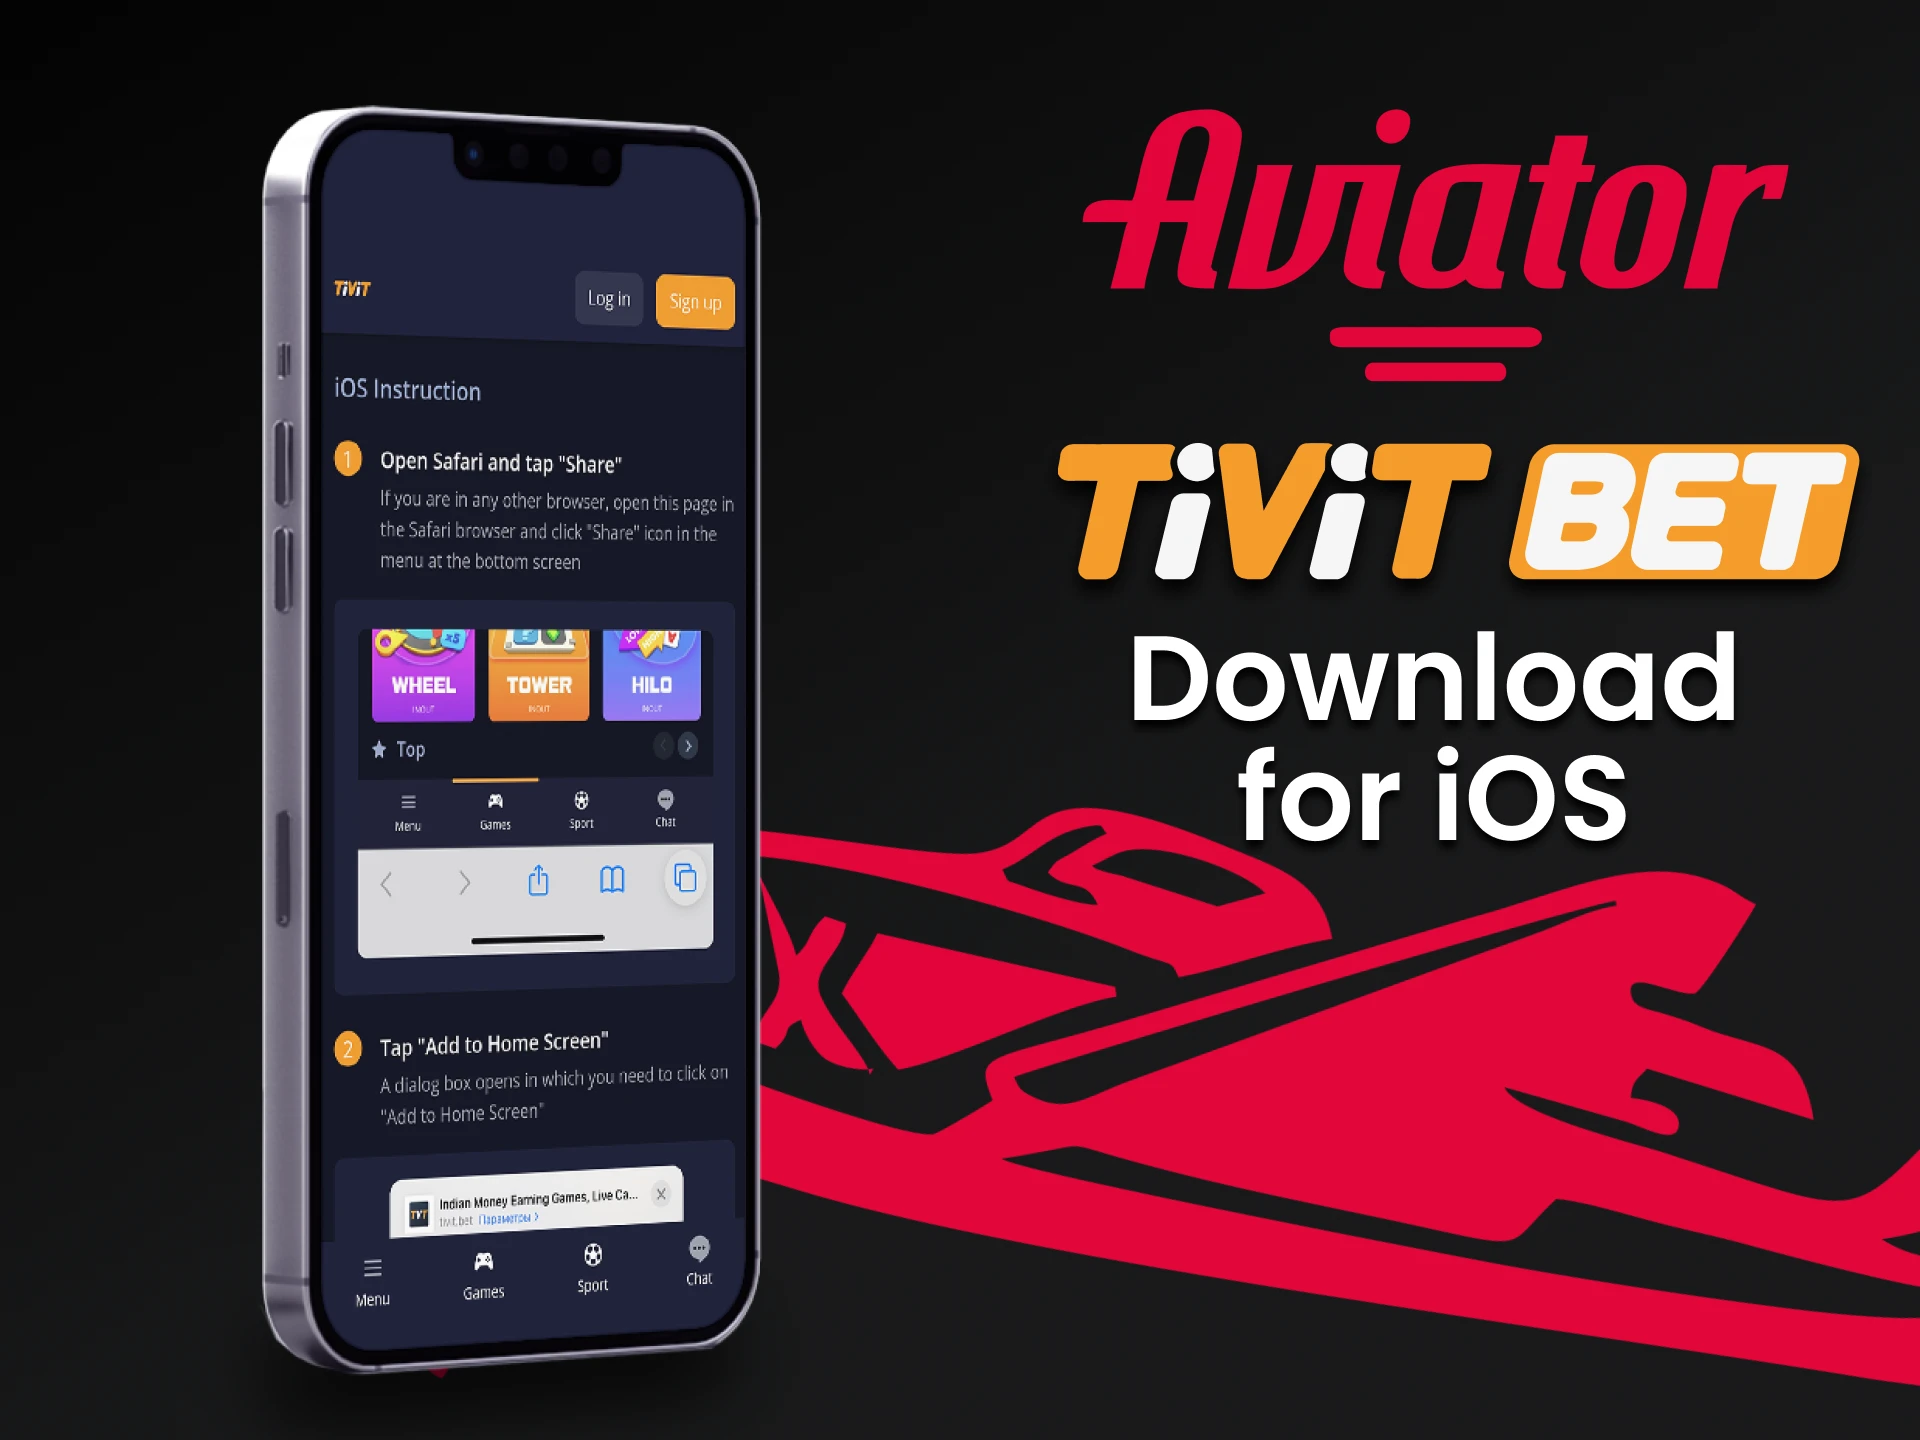 Download the Tivitbet app for iOS.